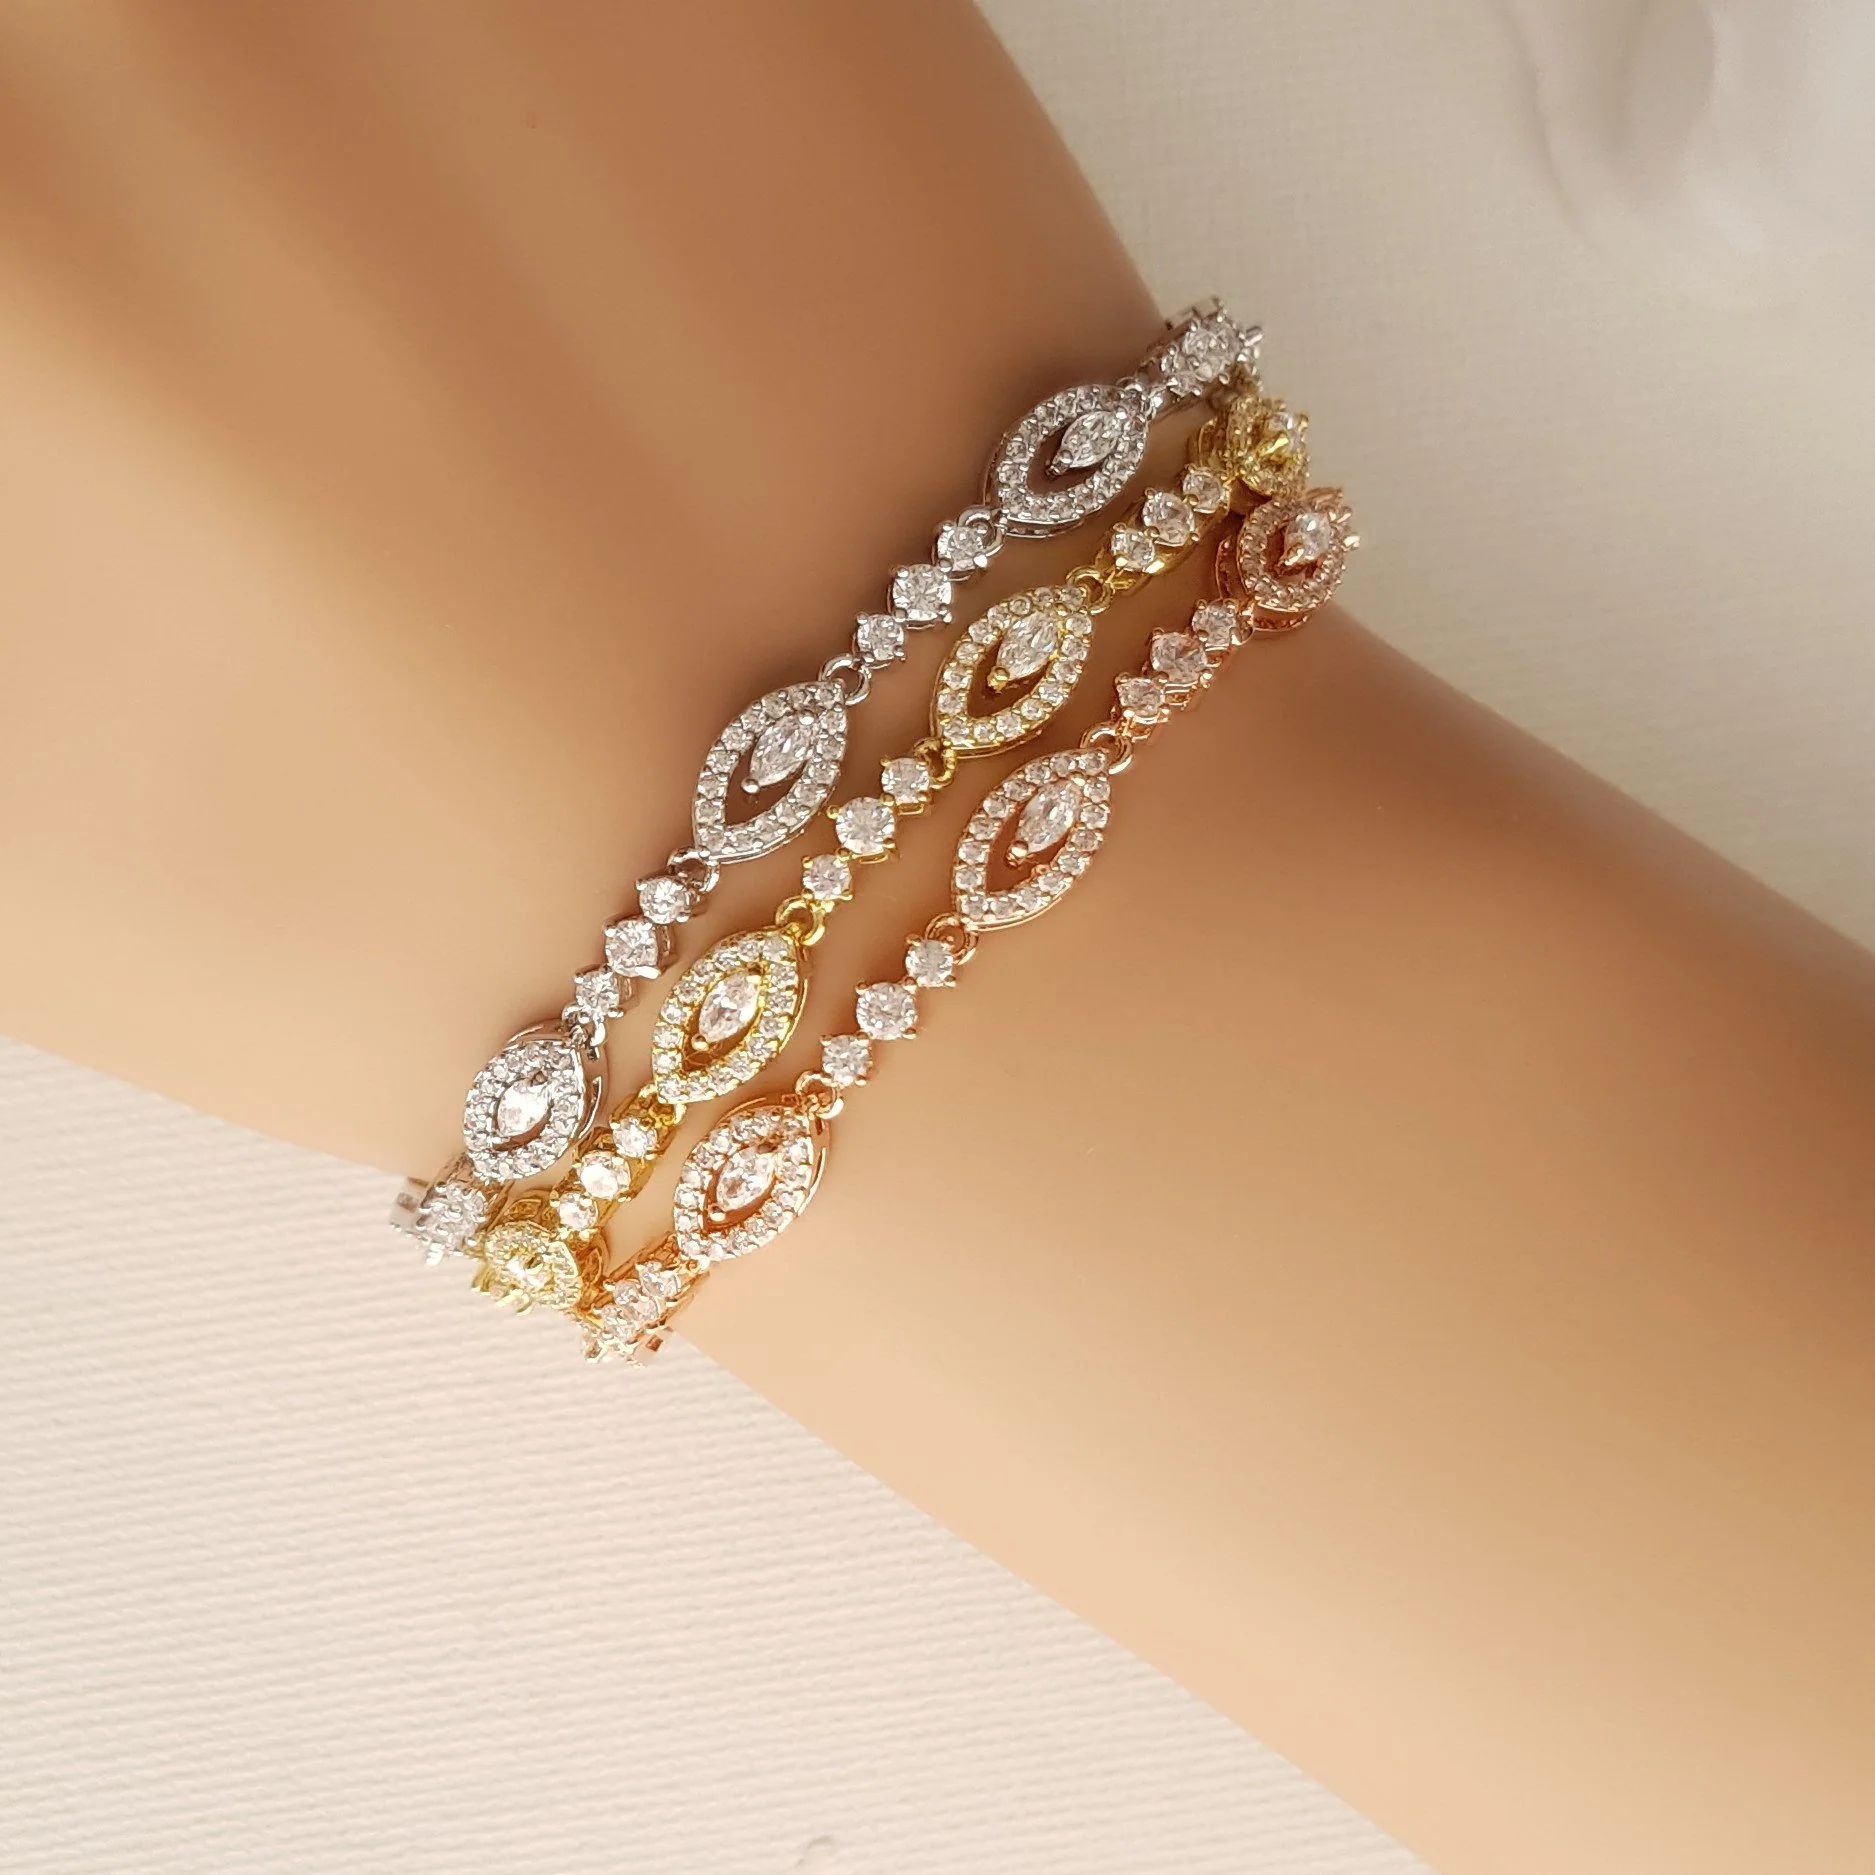 Gold stacking bracelets have become a popular trend in fashion, allowing individuals to mix and match various styles to create unique